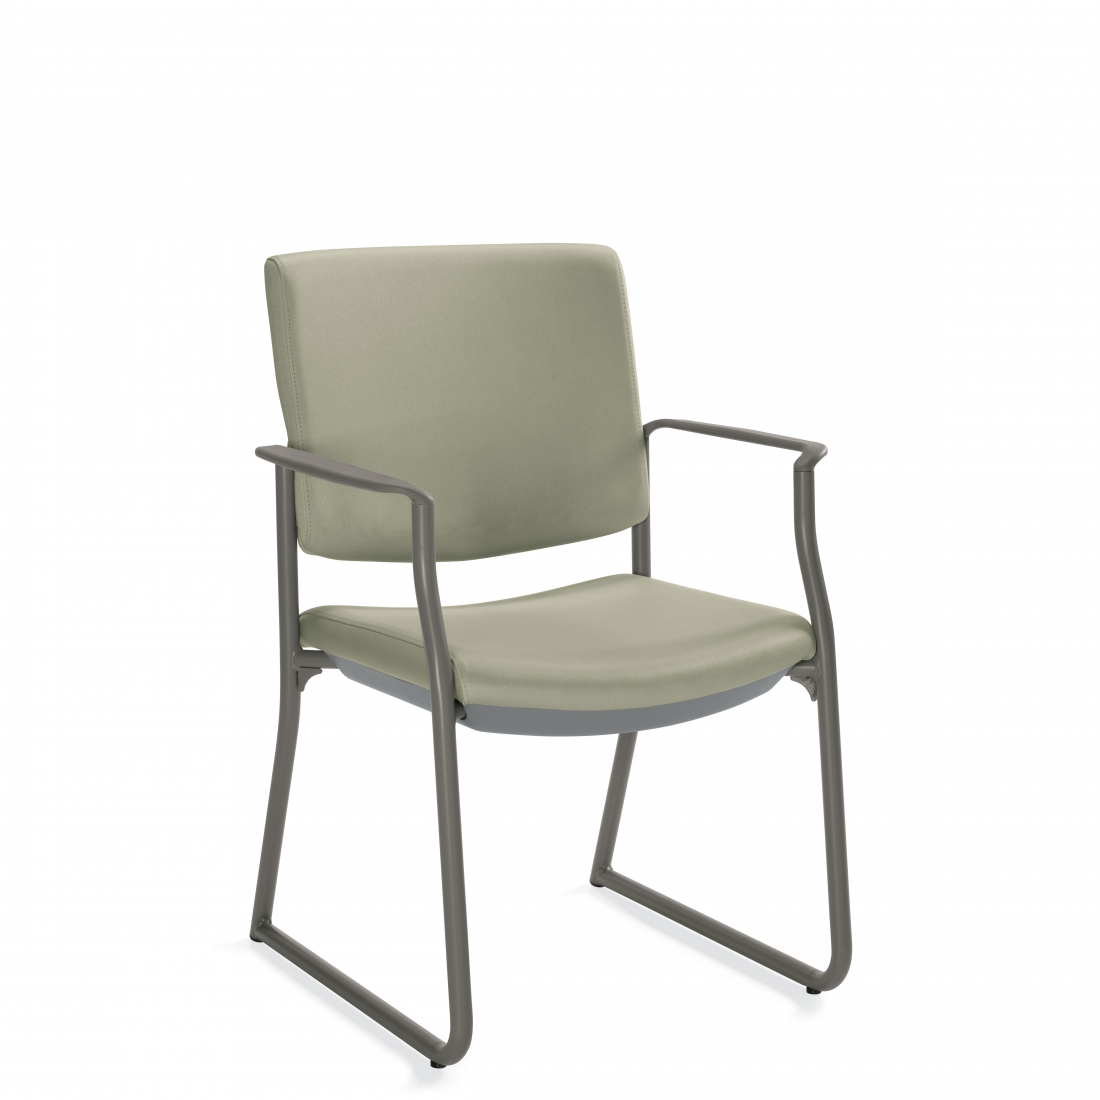 Armchair, Rectangular Back, Concealed Attachment, Sled Base